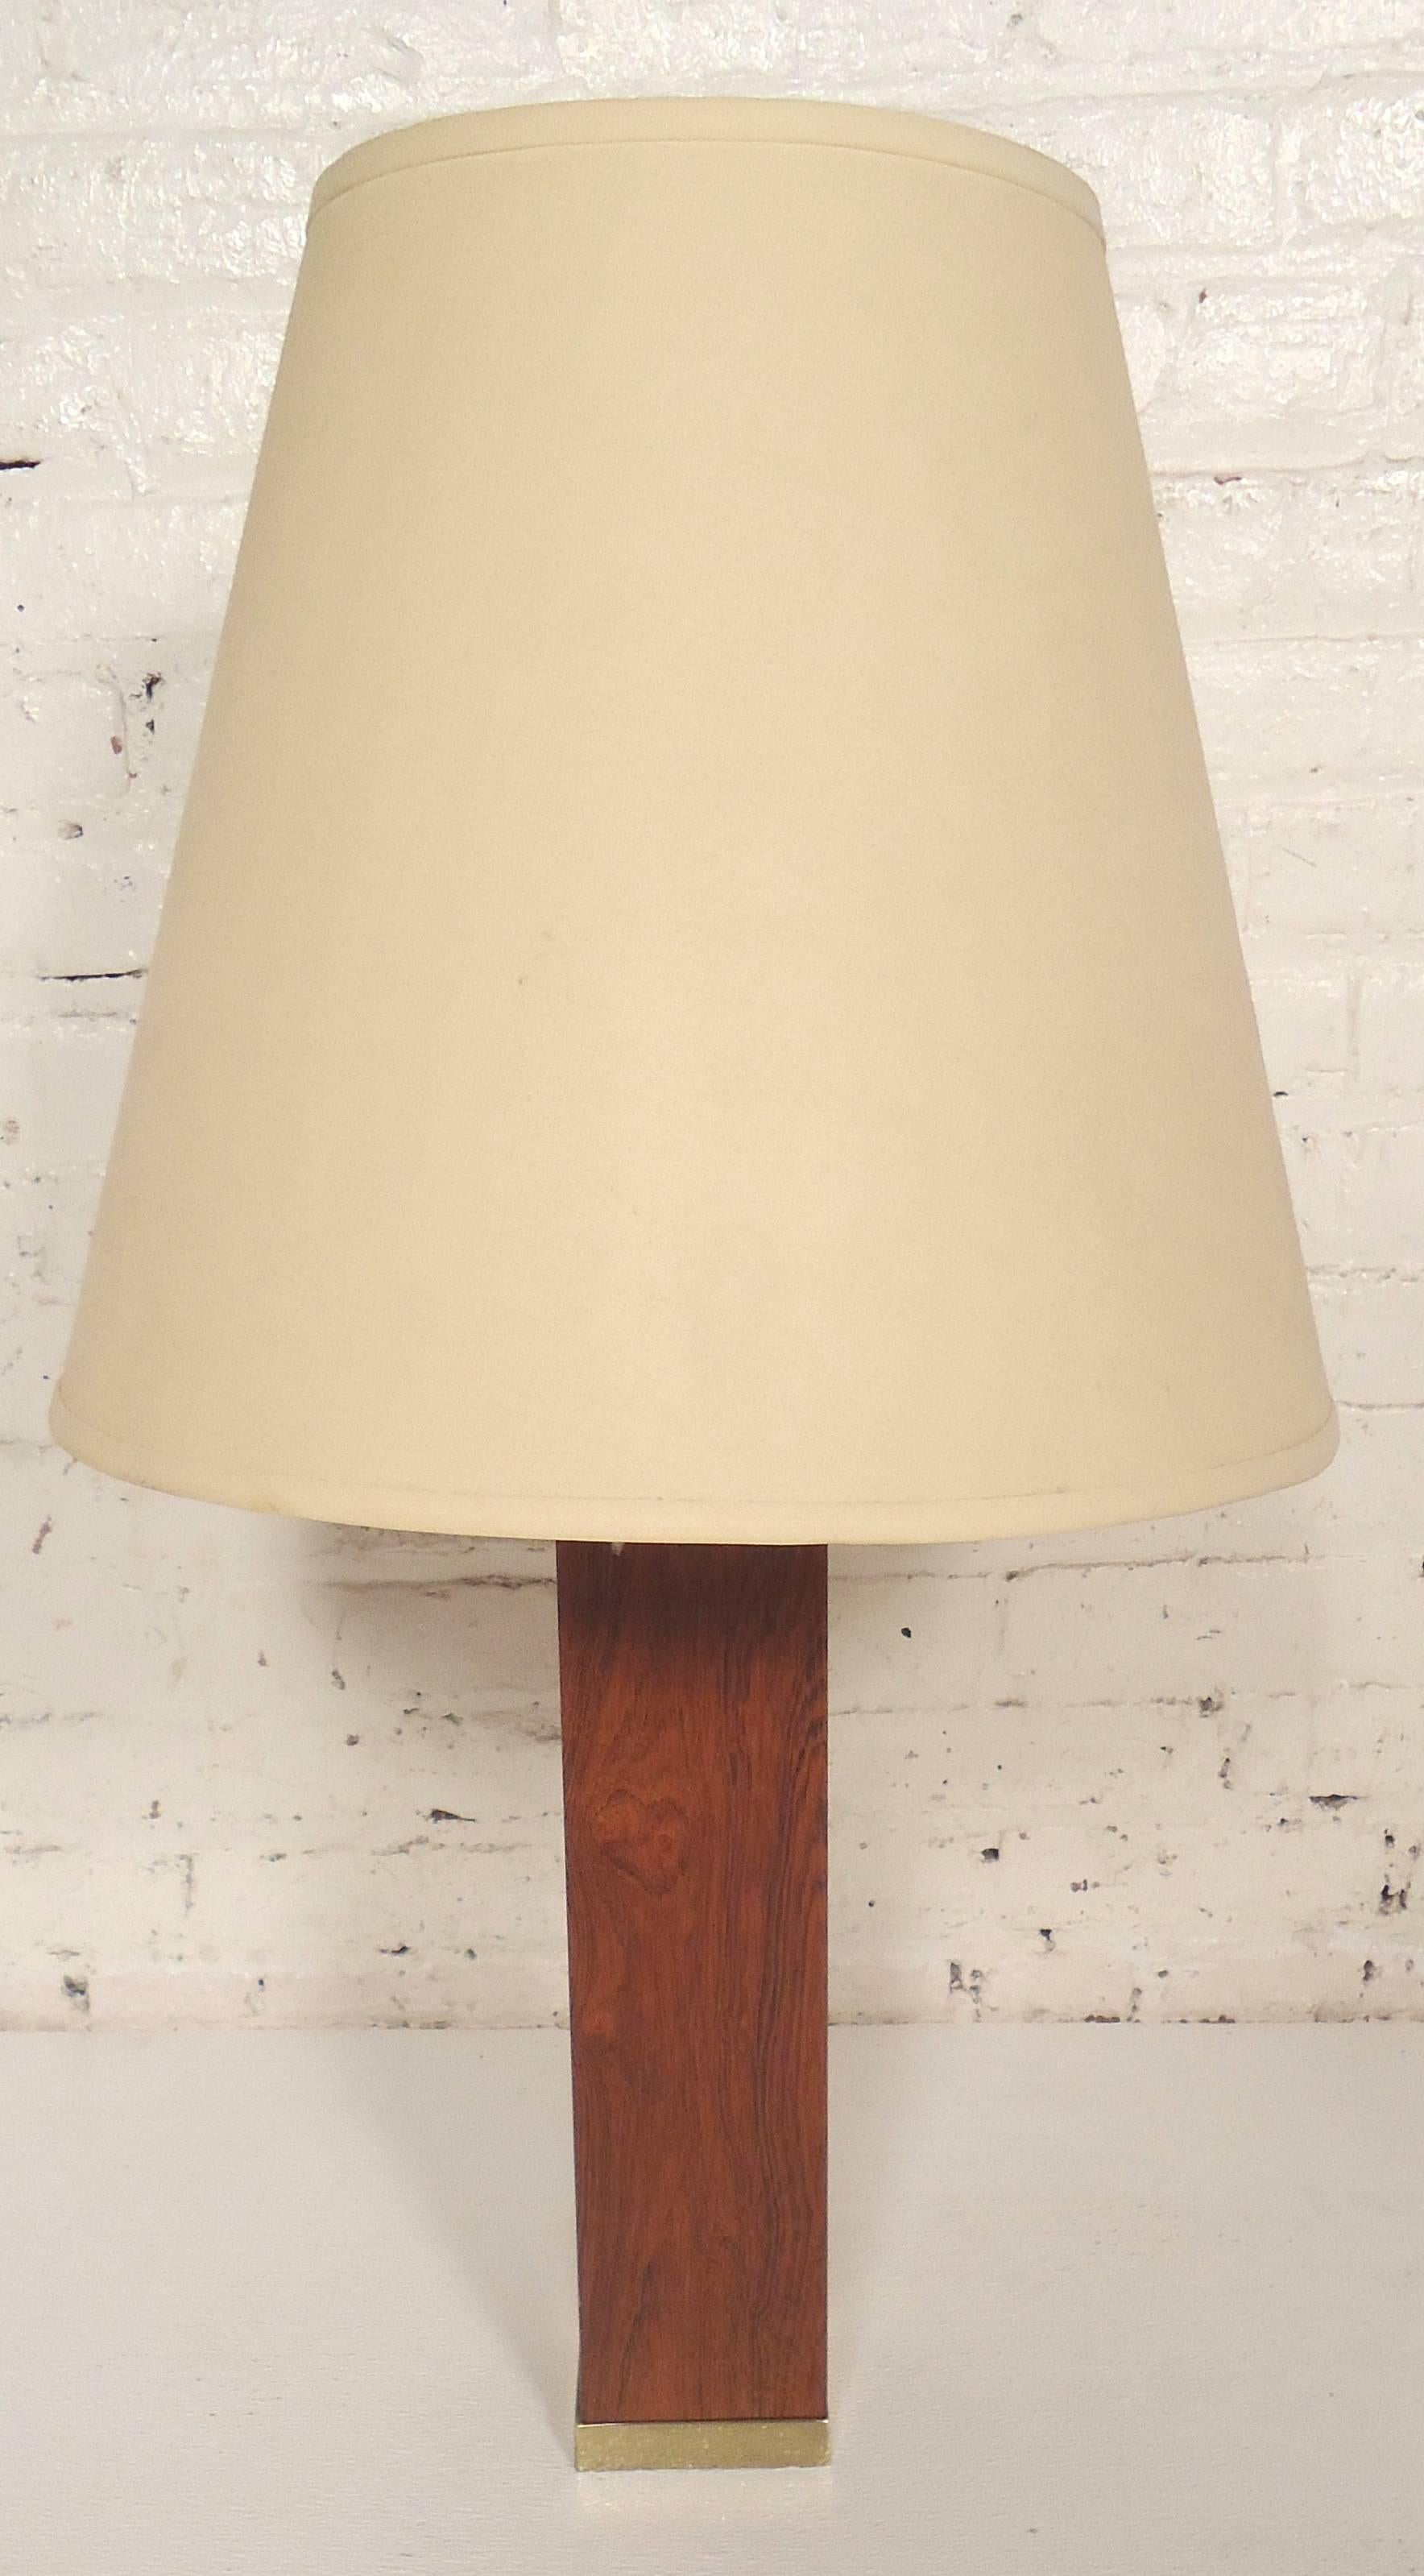 Simple and elegant wood table lamp with brass base. Square lamp with warm teak grain.

(Please confirm item location - NY or NJ - with dealer).
  